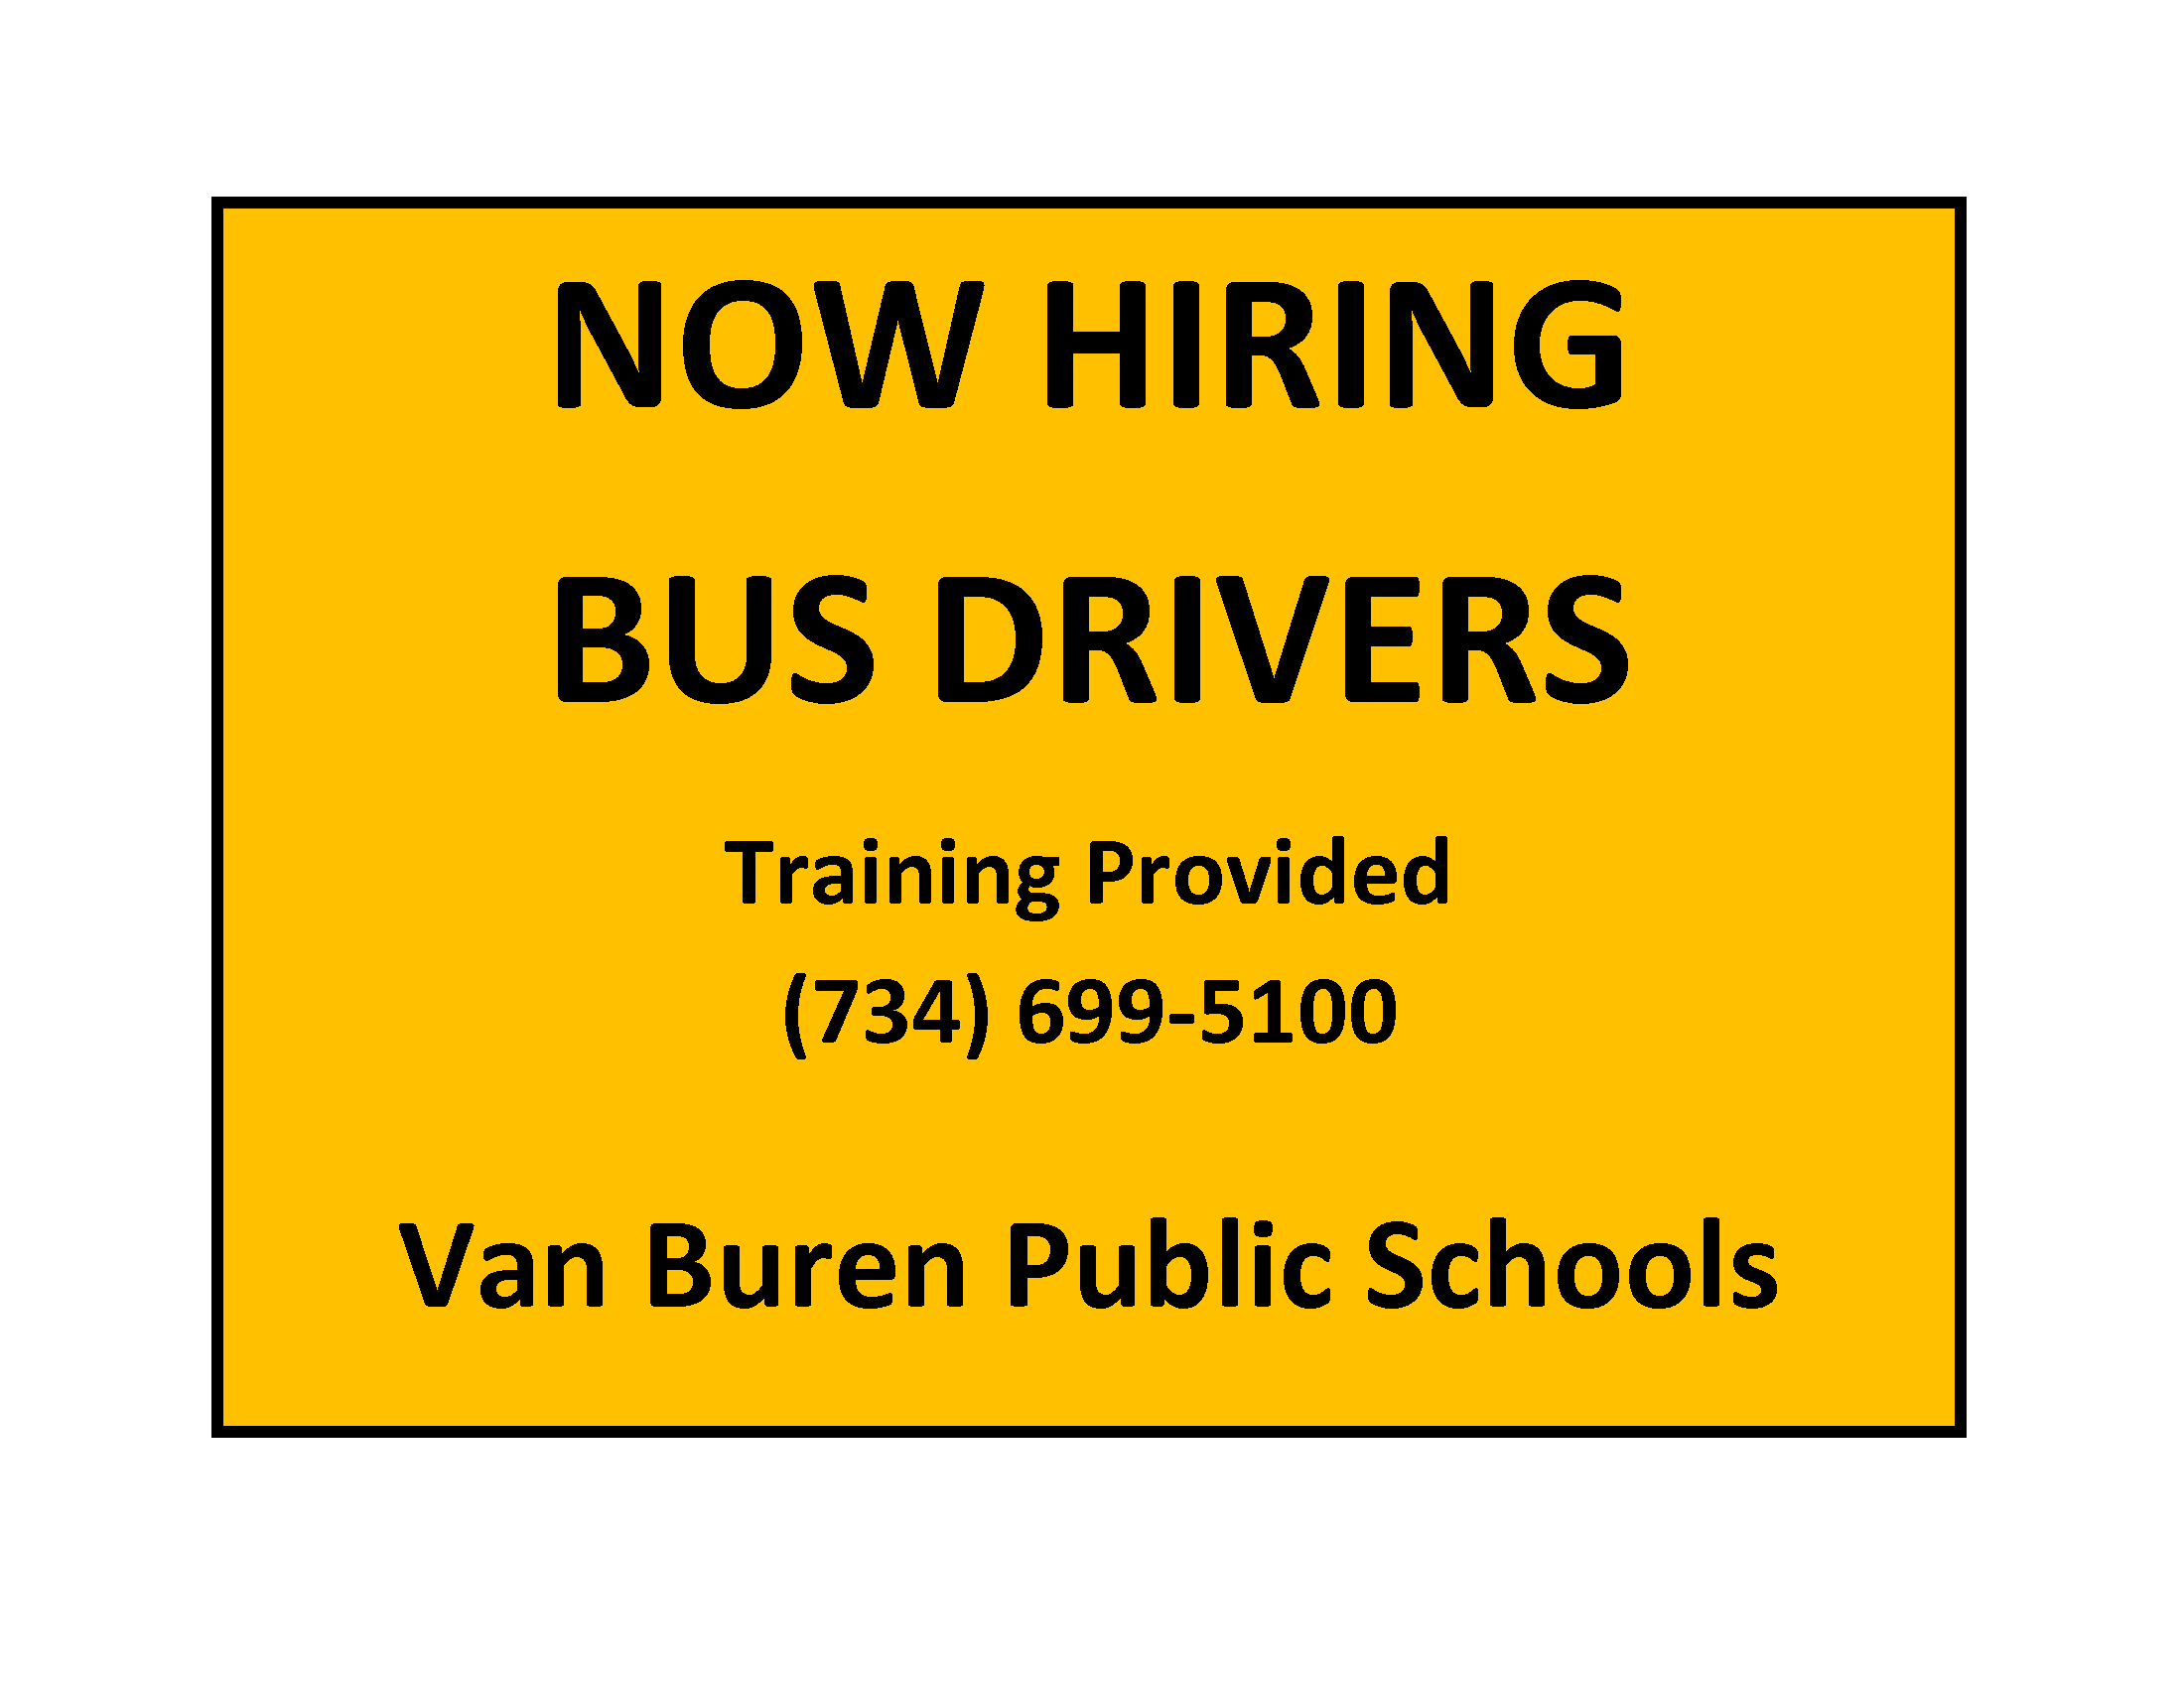 now hiring bus drivers flyer